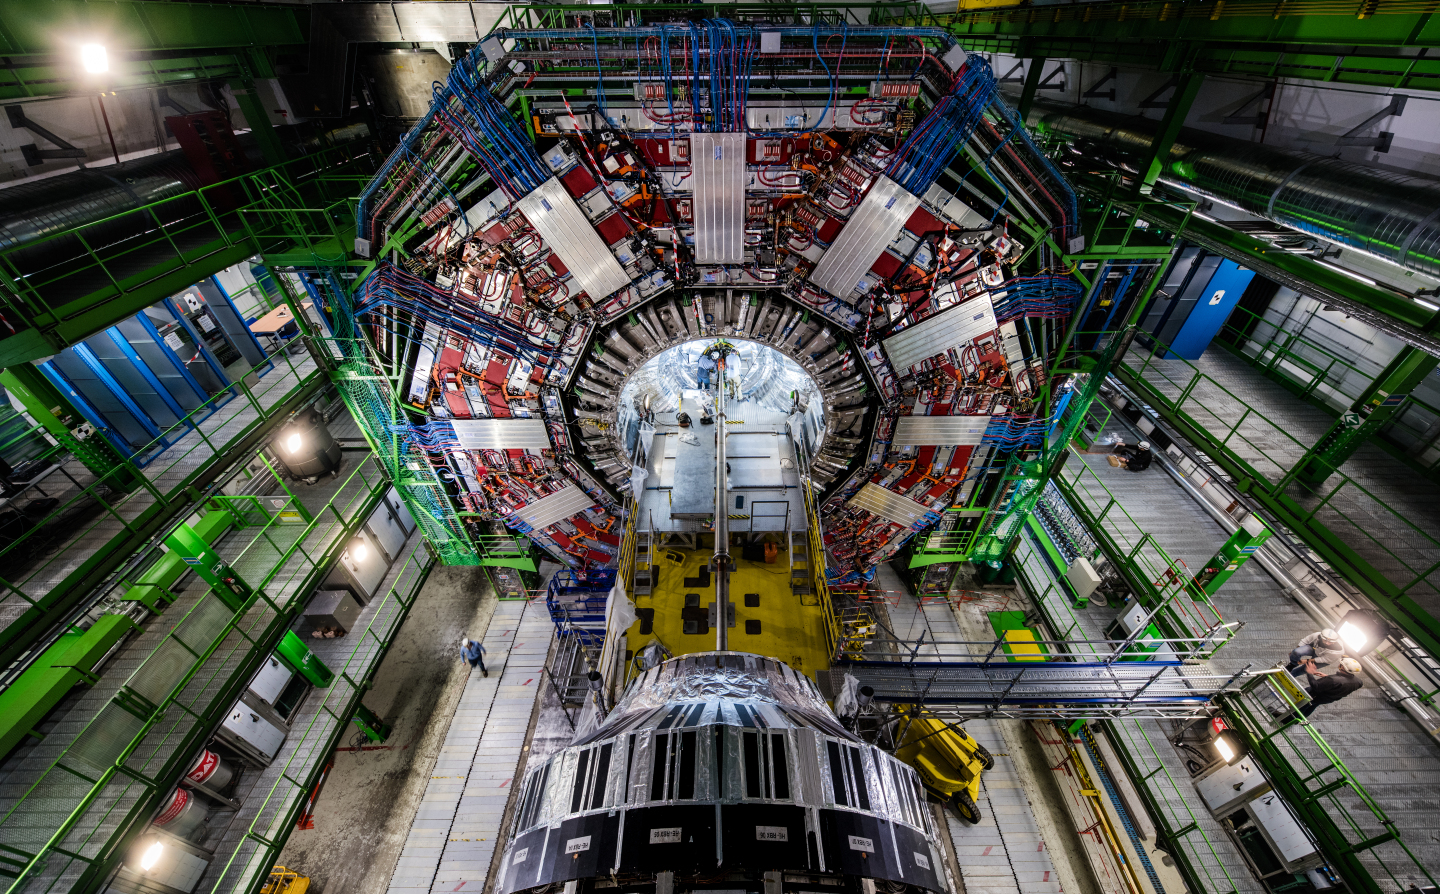 The 21 m long Compact Muon Solenoid detector acts as a giant, high-speed camera, taking 3D 'photographs' of particle collisions up to 40 million times each second. (Picture courtesy CERN.)